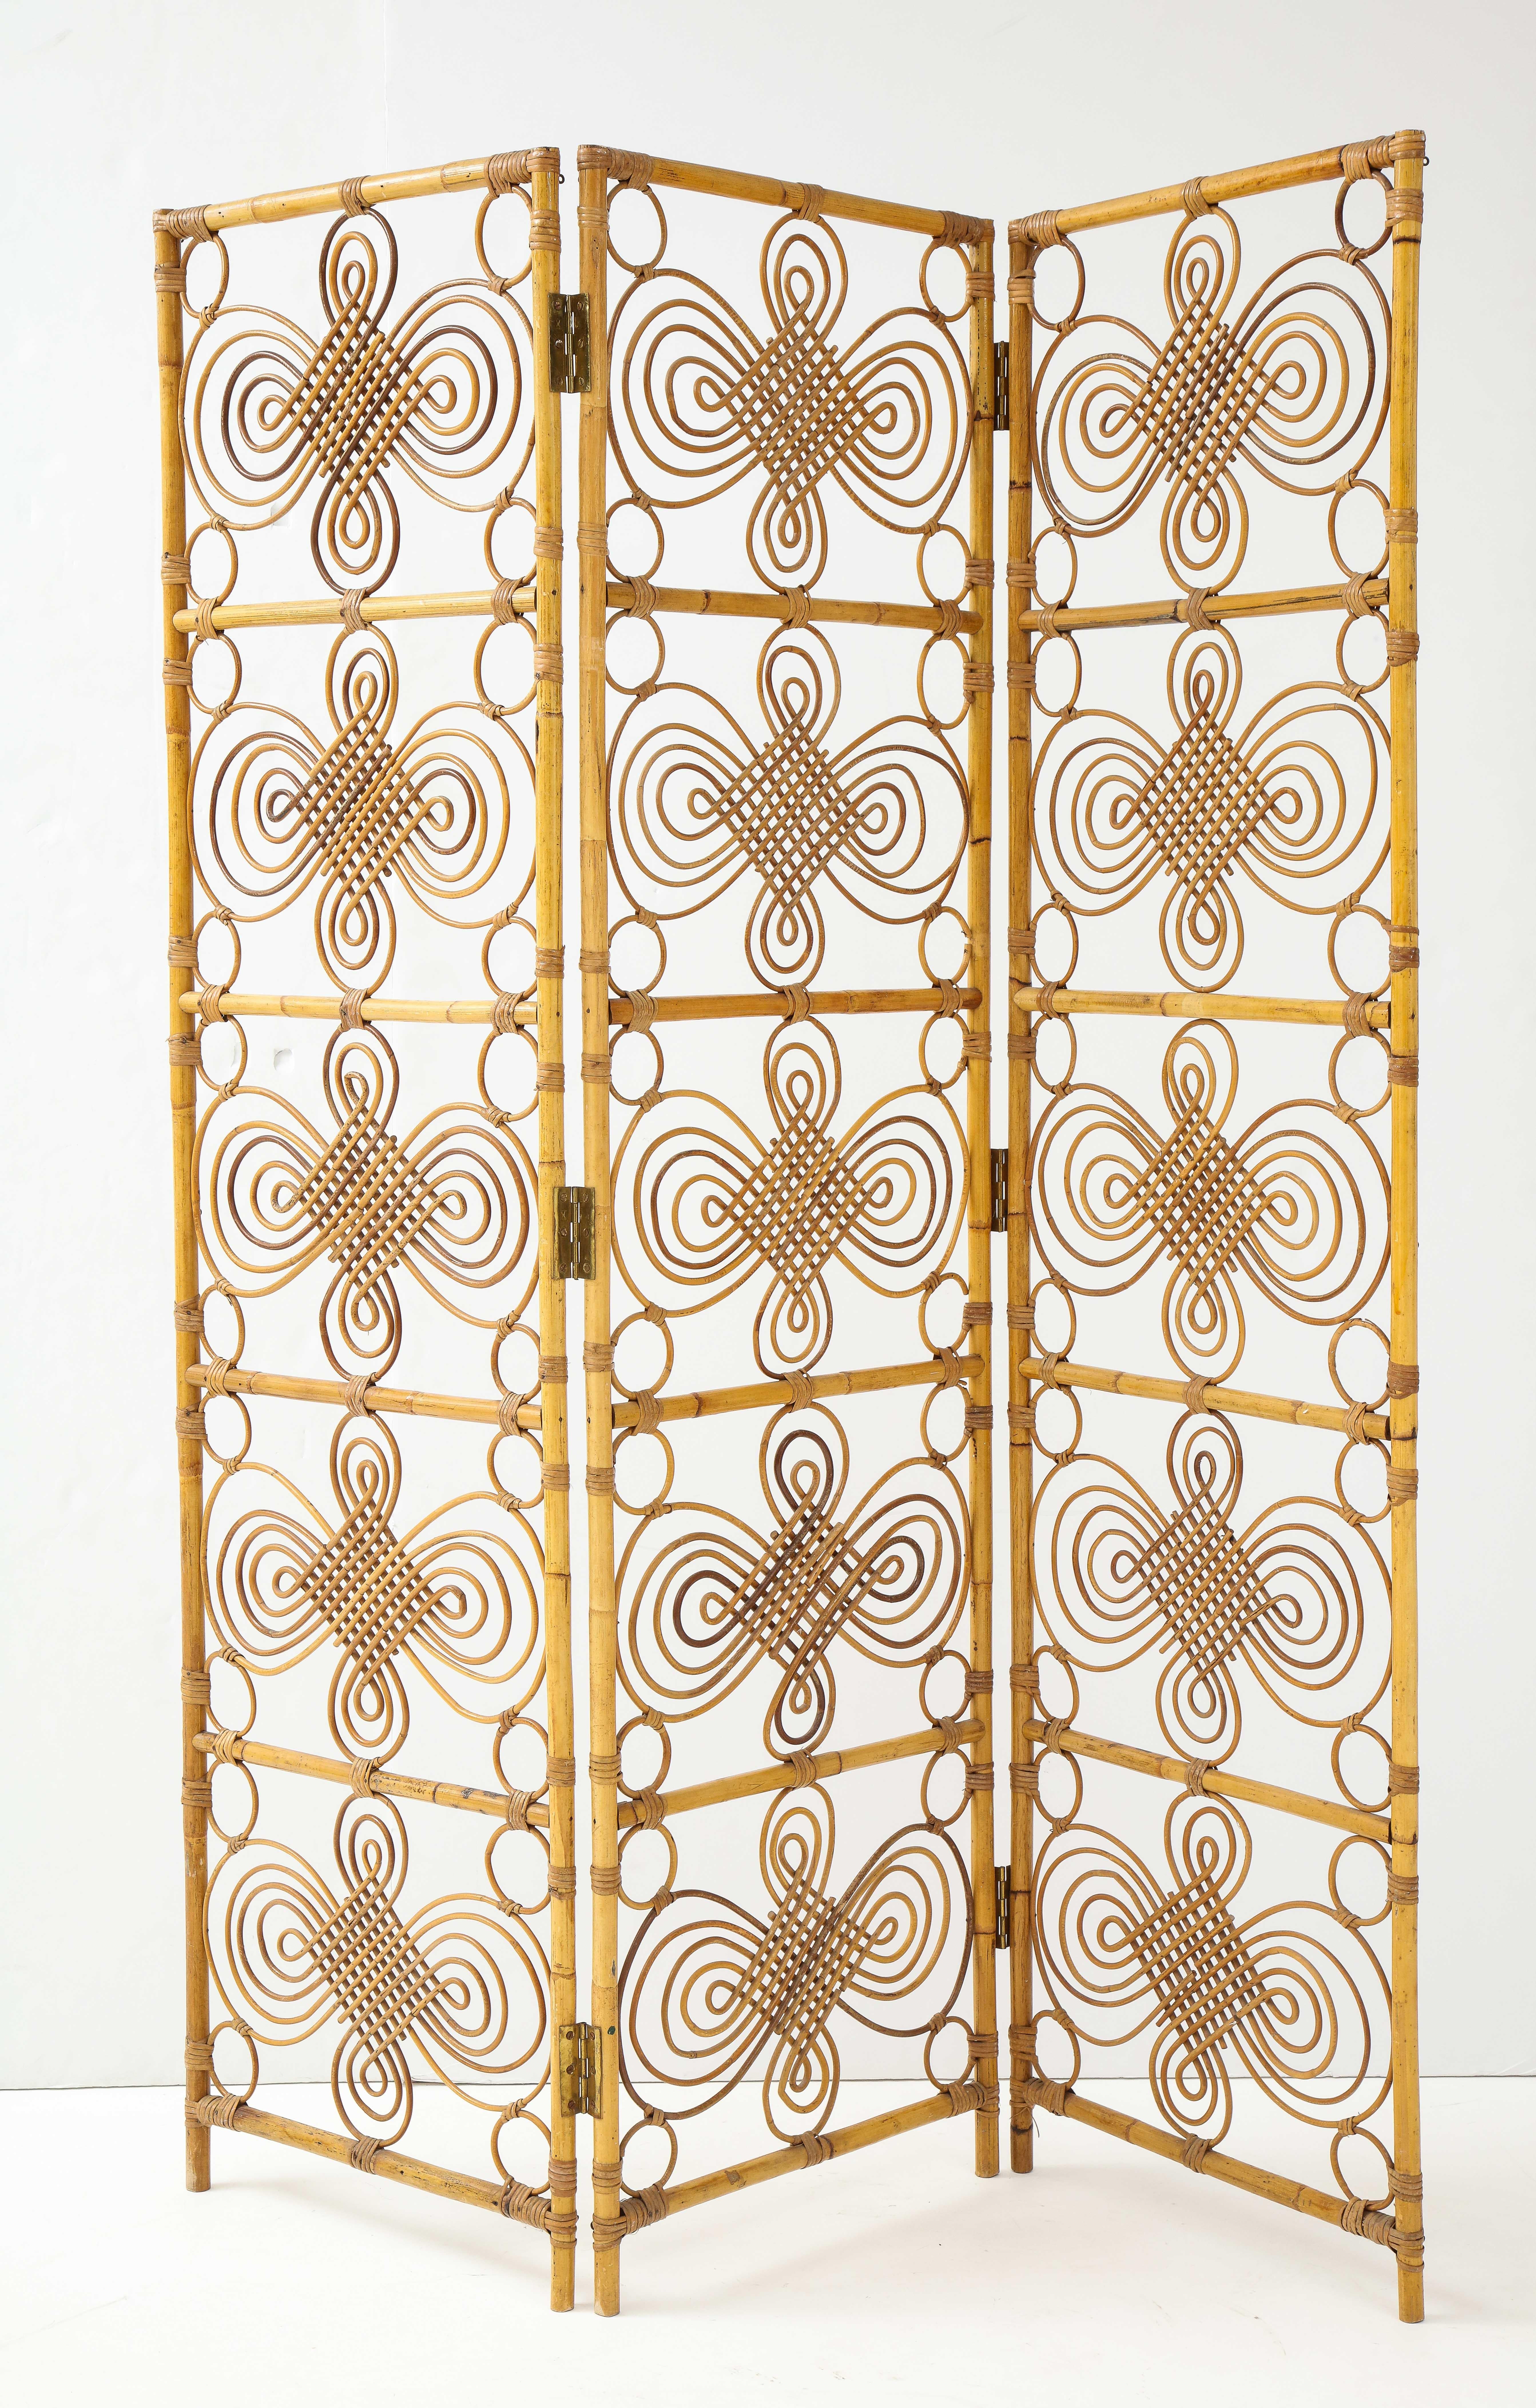 A beautifully ornamental handmade three panel bamboo screen; the bamboo held together with brass pins and screen connected via brass hinges. A dramatic way to divide a room or space, very light in feeling, the screen with a stunning circular and